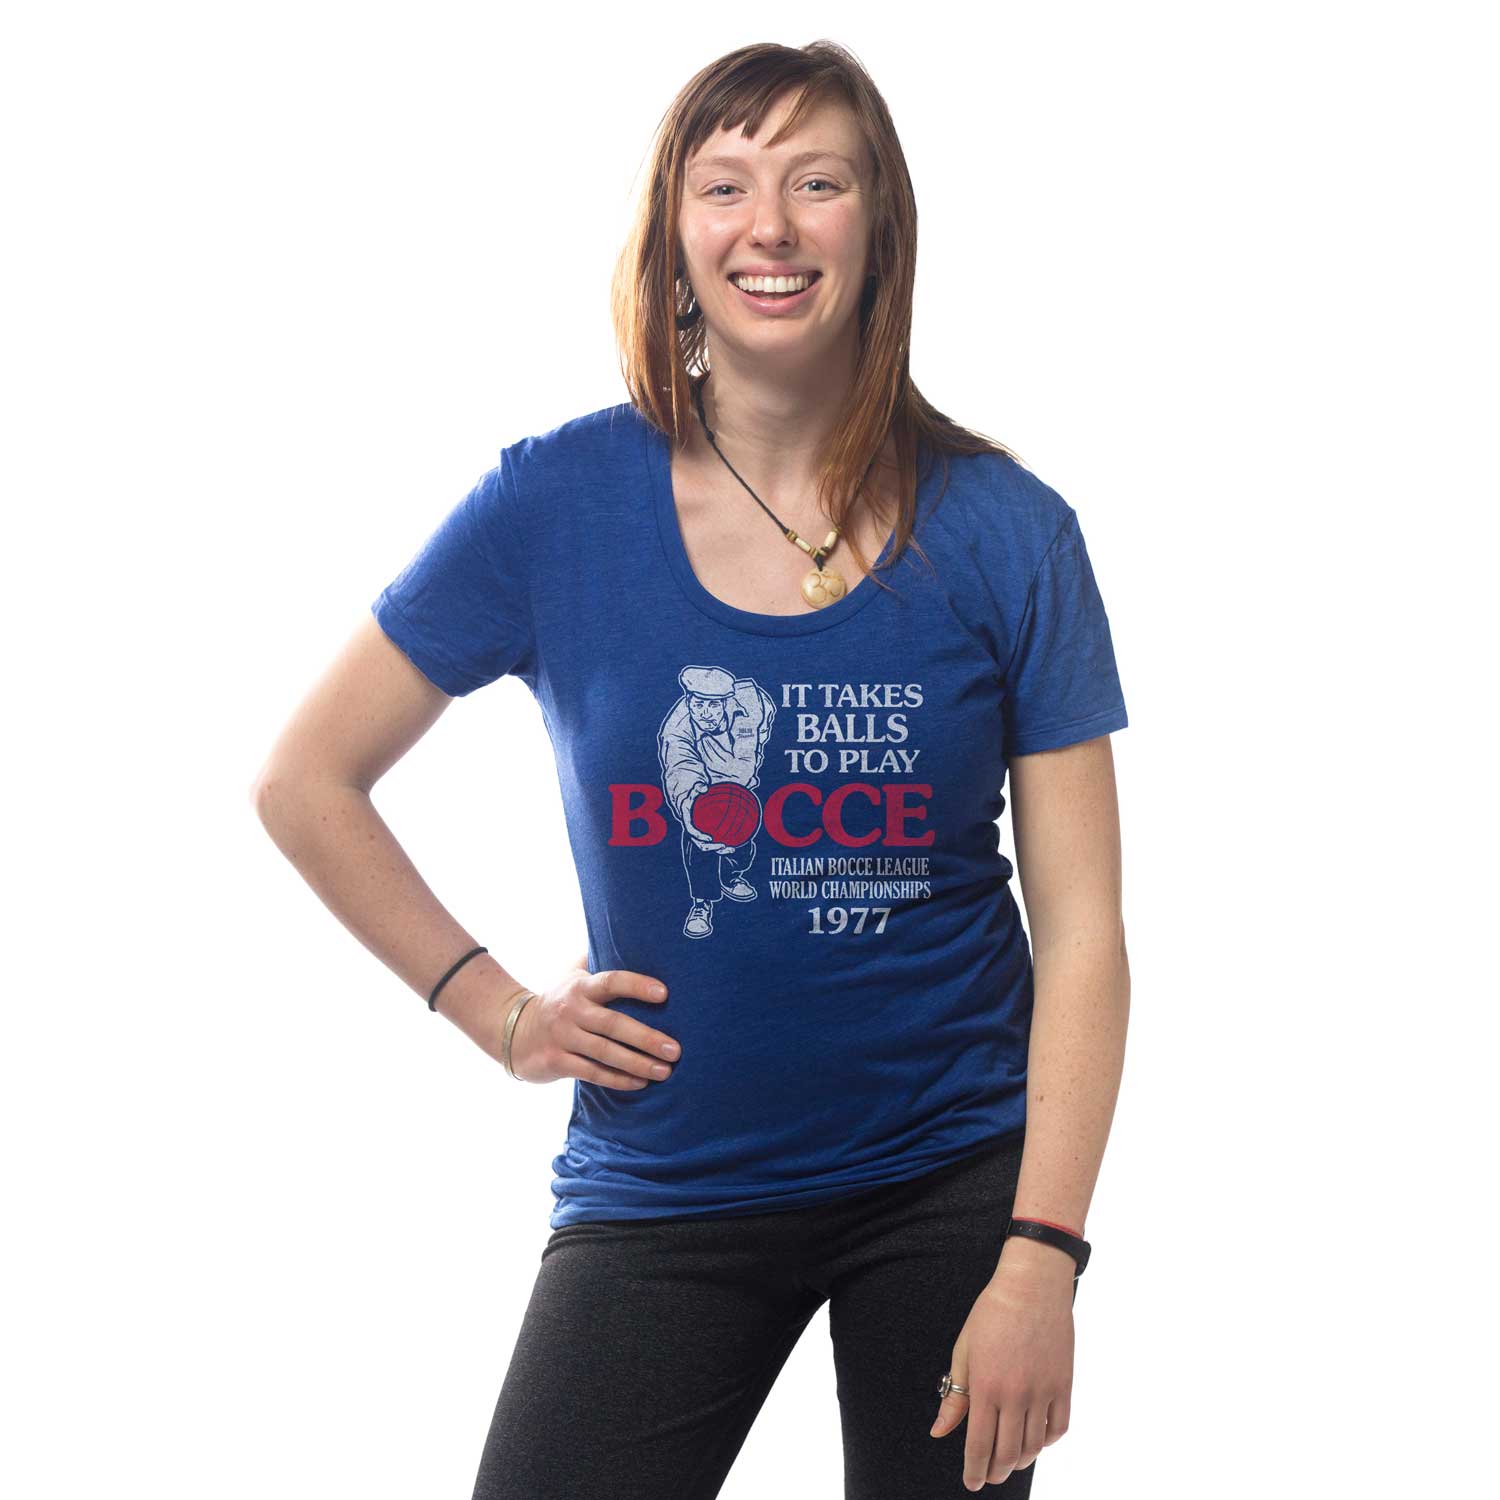 Women's It Takes Balls to Play Bocce Graphic Tee | Retro Sports T-shirt on Model | Solid Threads